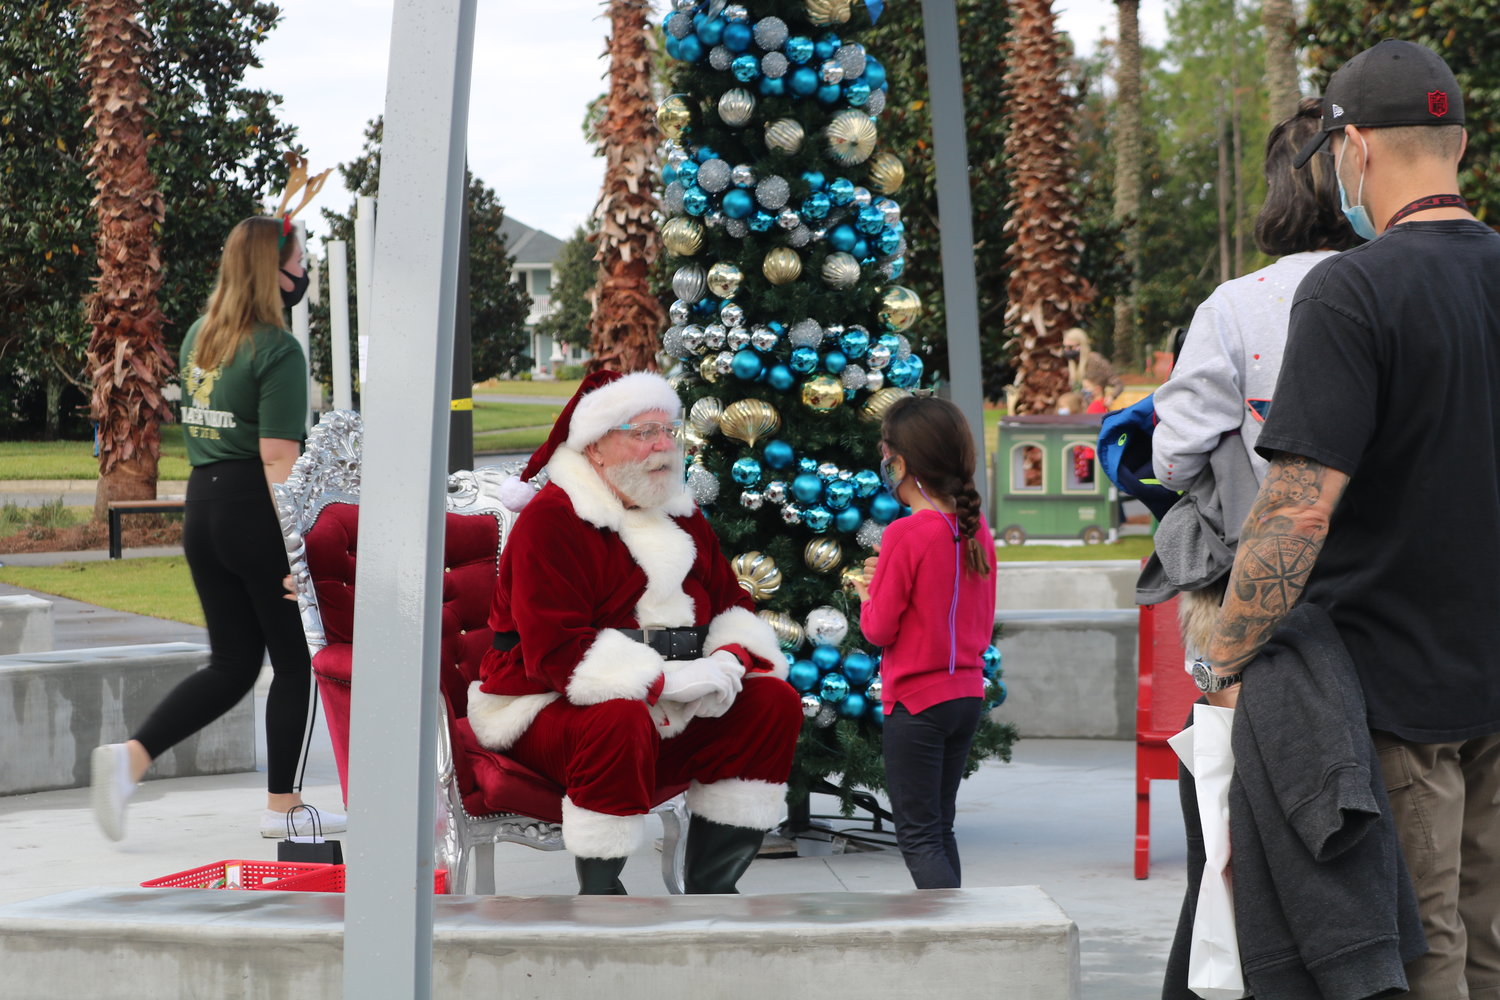 Santa Claus greets children from a safe distance to spread Christmas cheer.